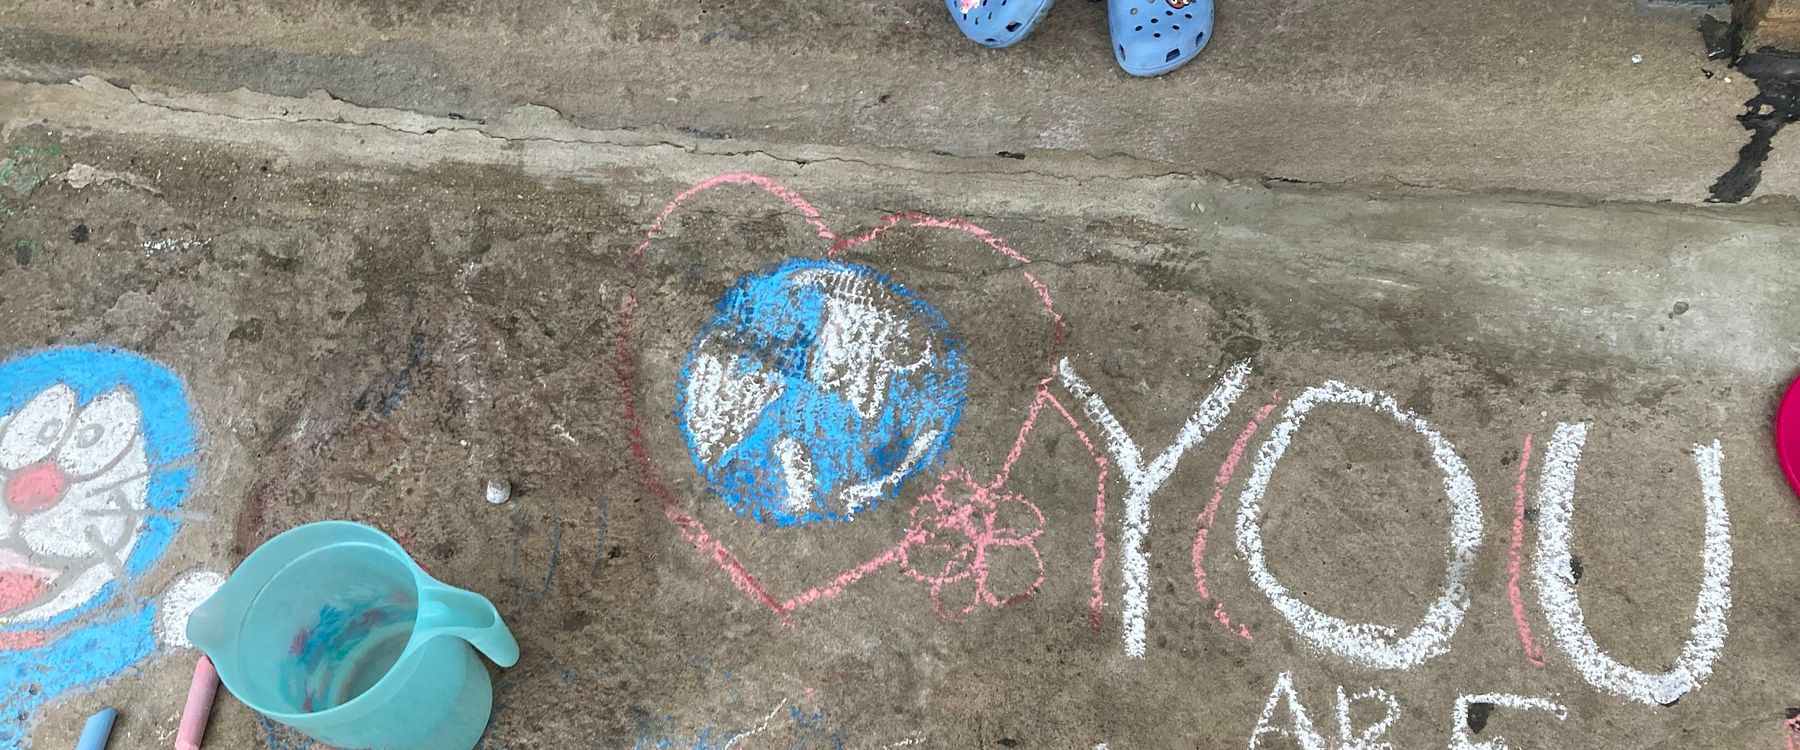 A chalk picture of the world in a heart next to text that reads "you are loved". Project completed by Chicago students as part of Earth Day service.